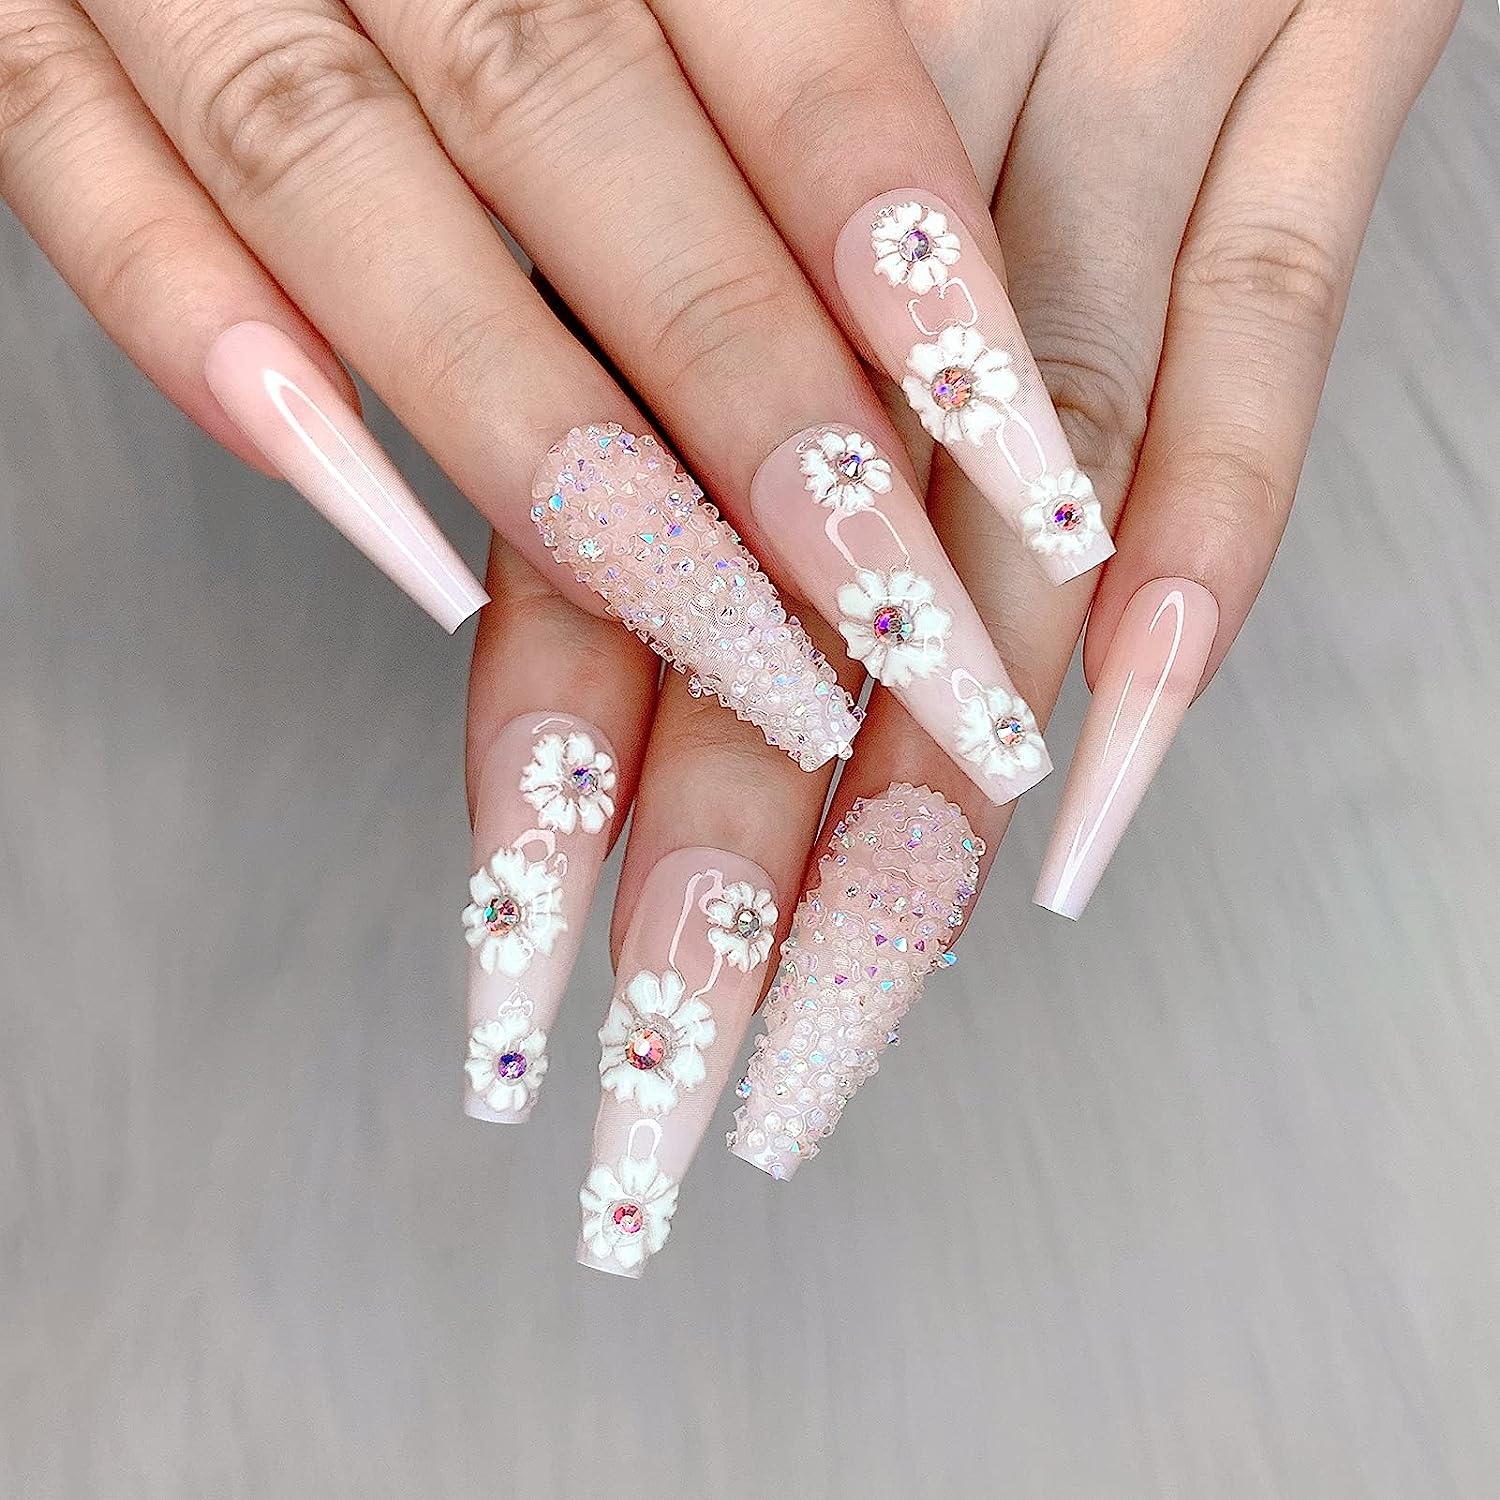 Artquee 24pcs French Nude White Ballerina Flash Diamond Crystal Long Glossy Coffin Flash Fake Nails Press on Nail False Tips